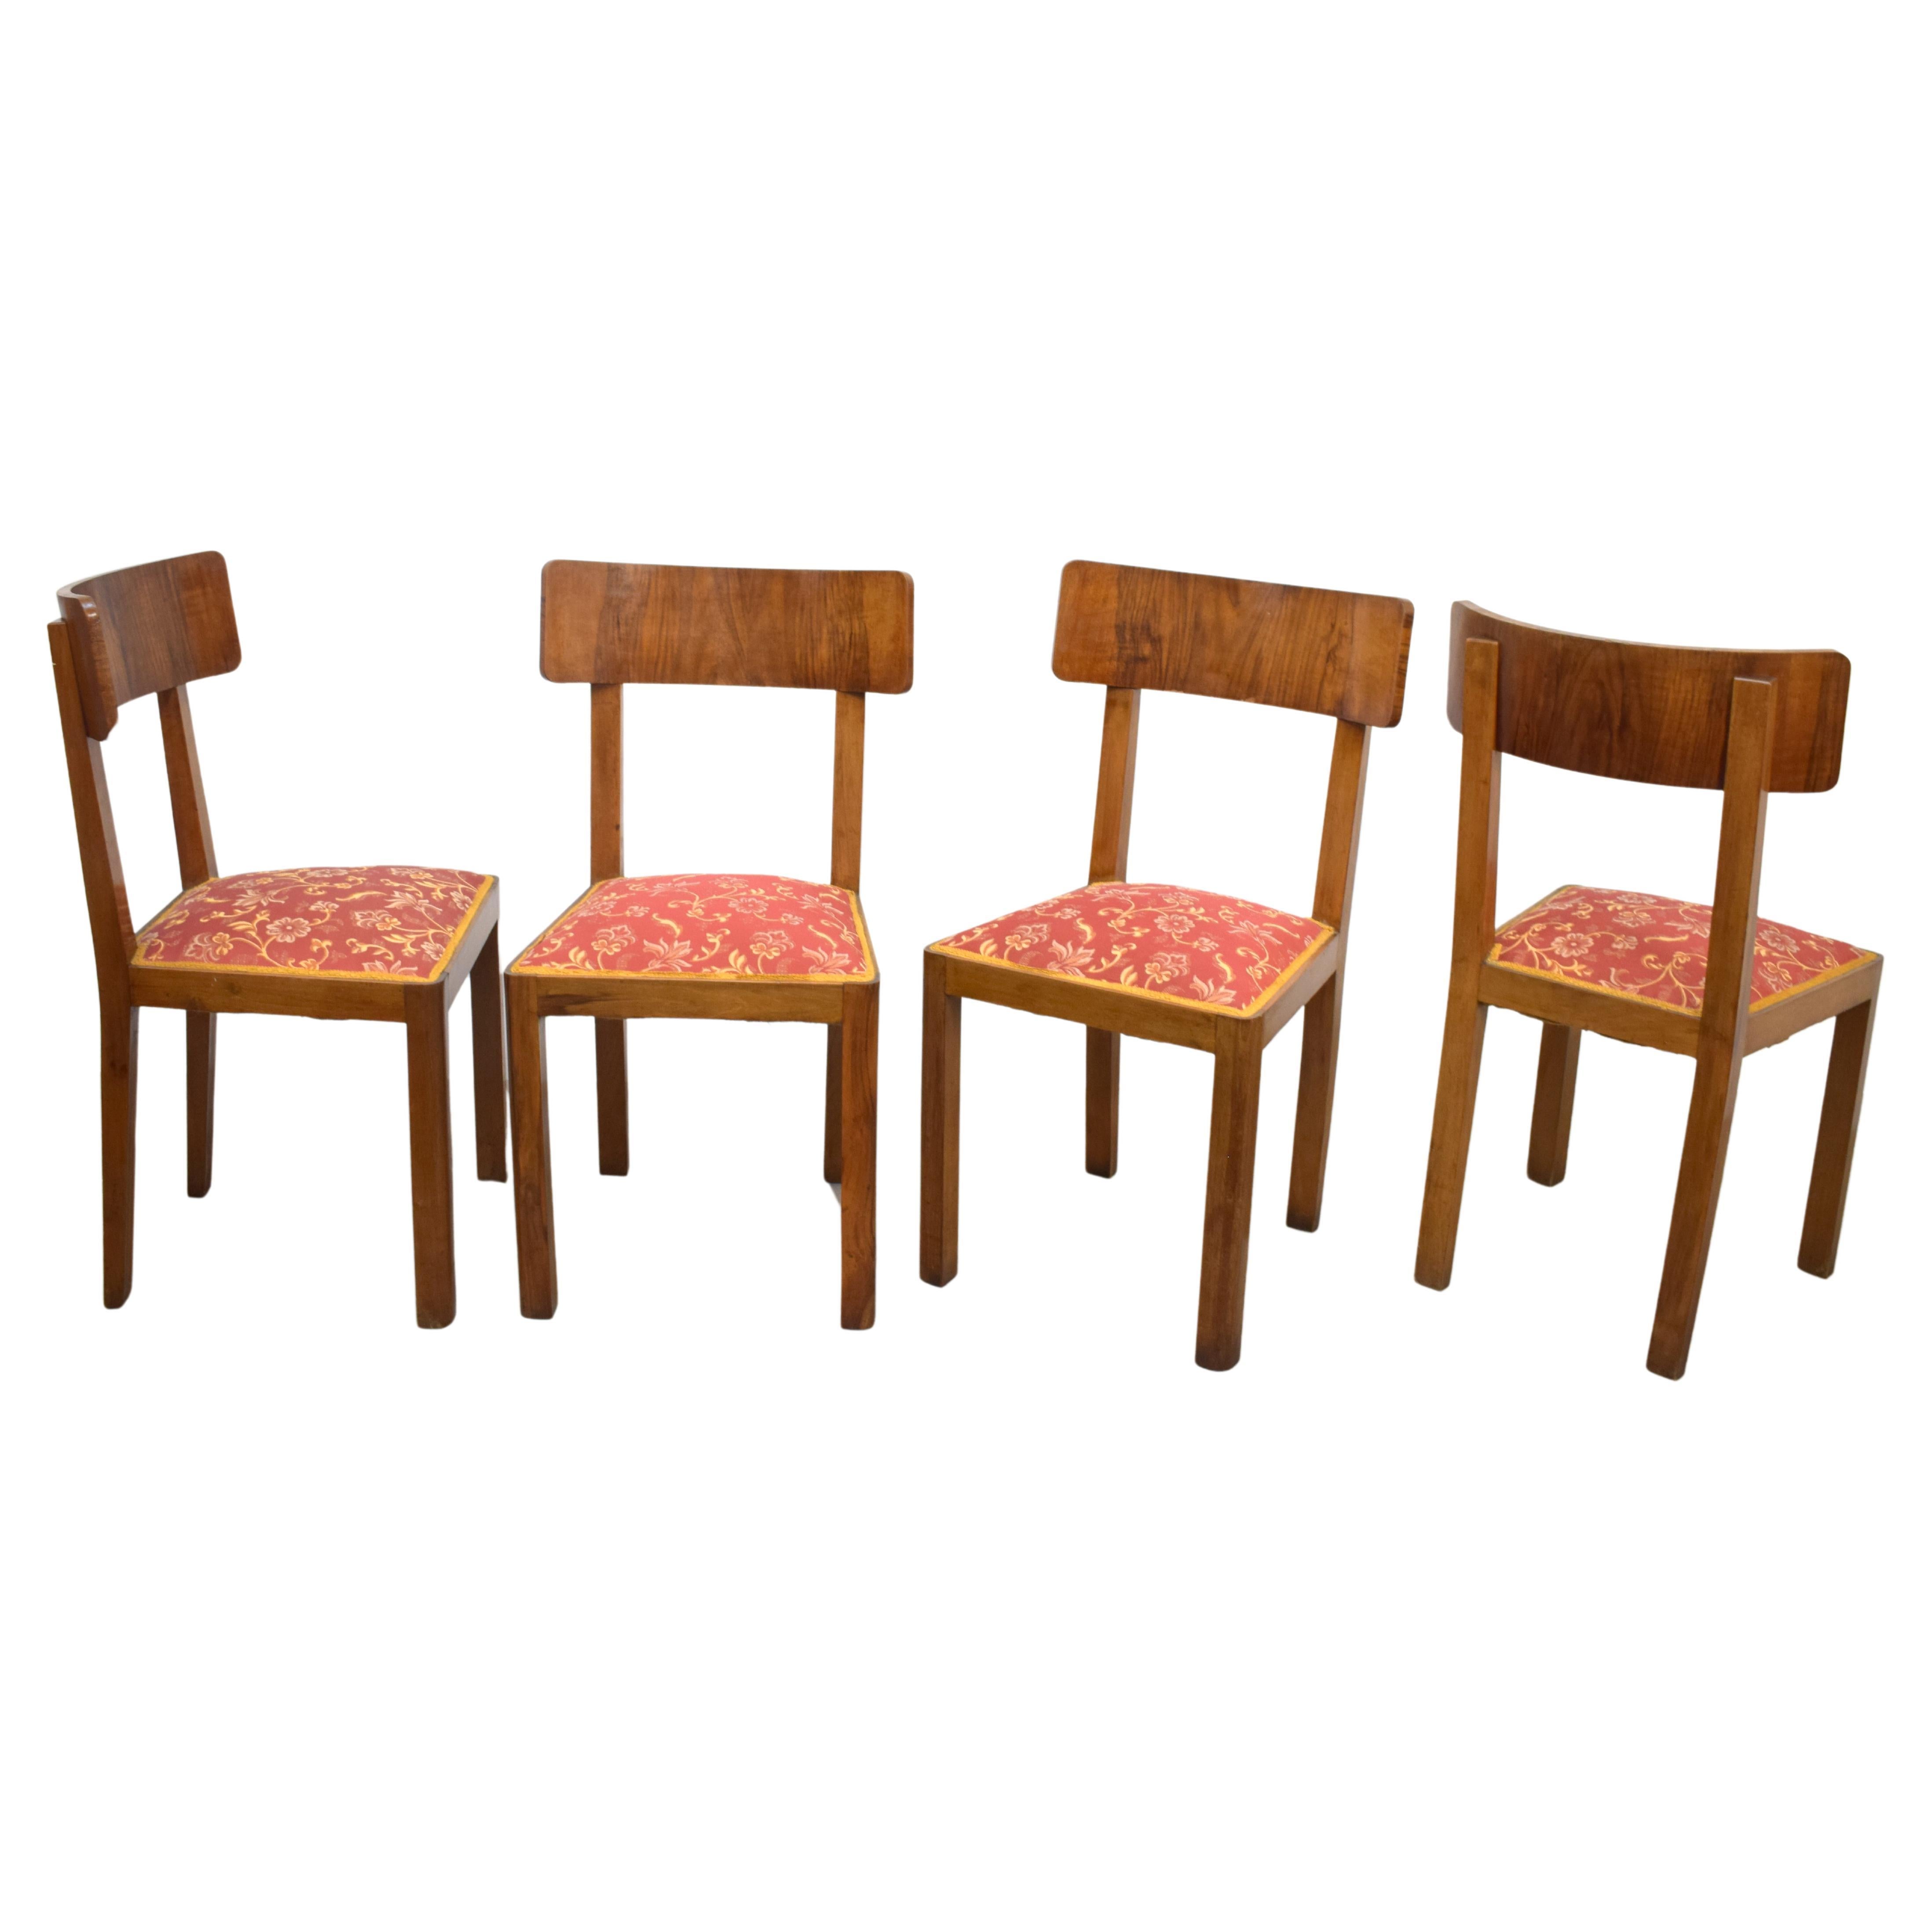 Set of 4 deco chairs, Italy, 1930s. For Sale